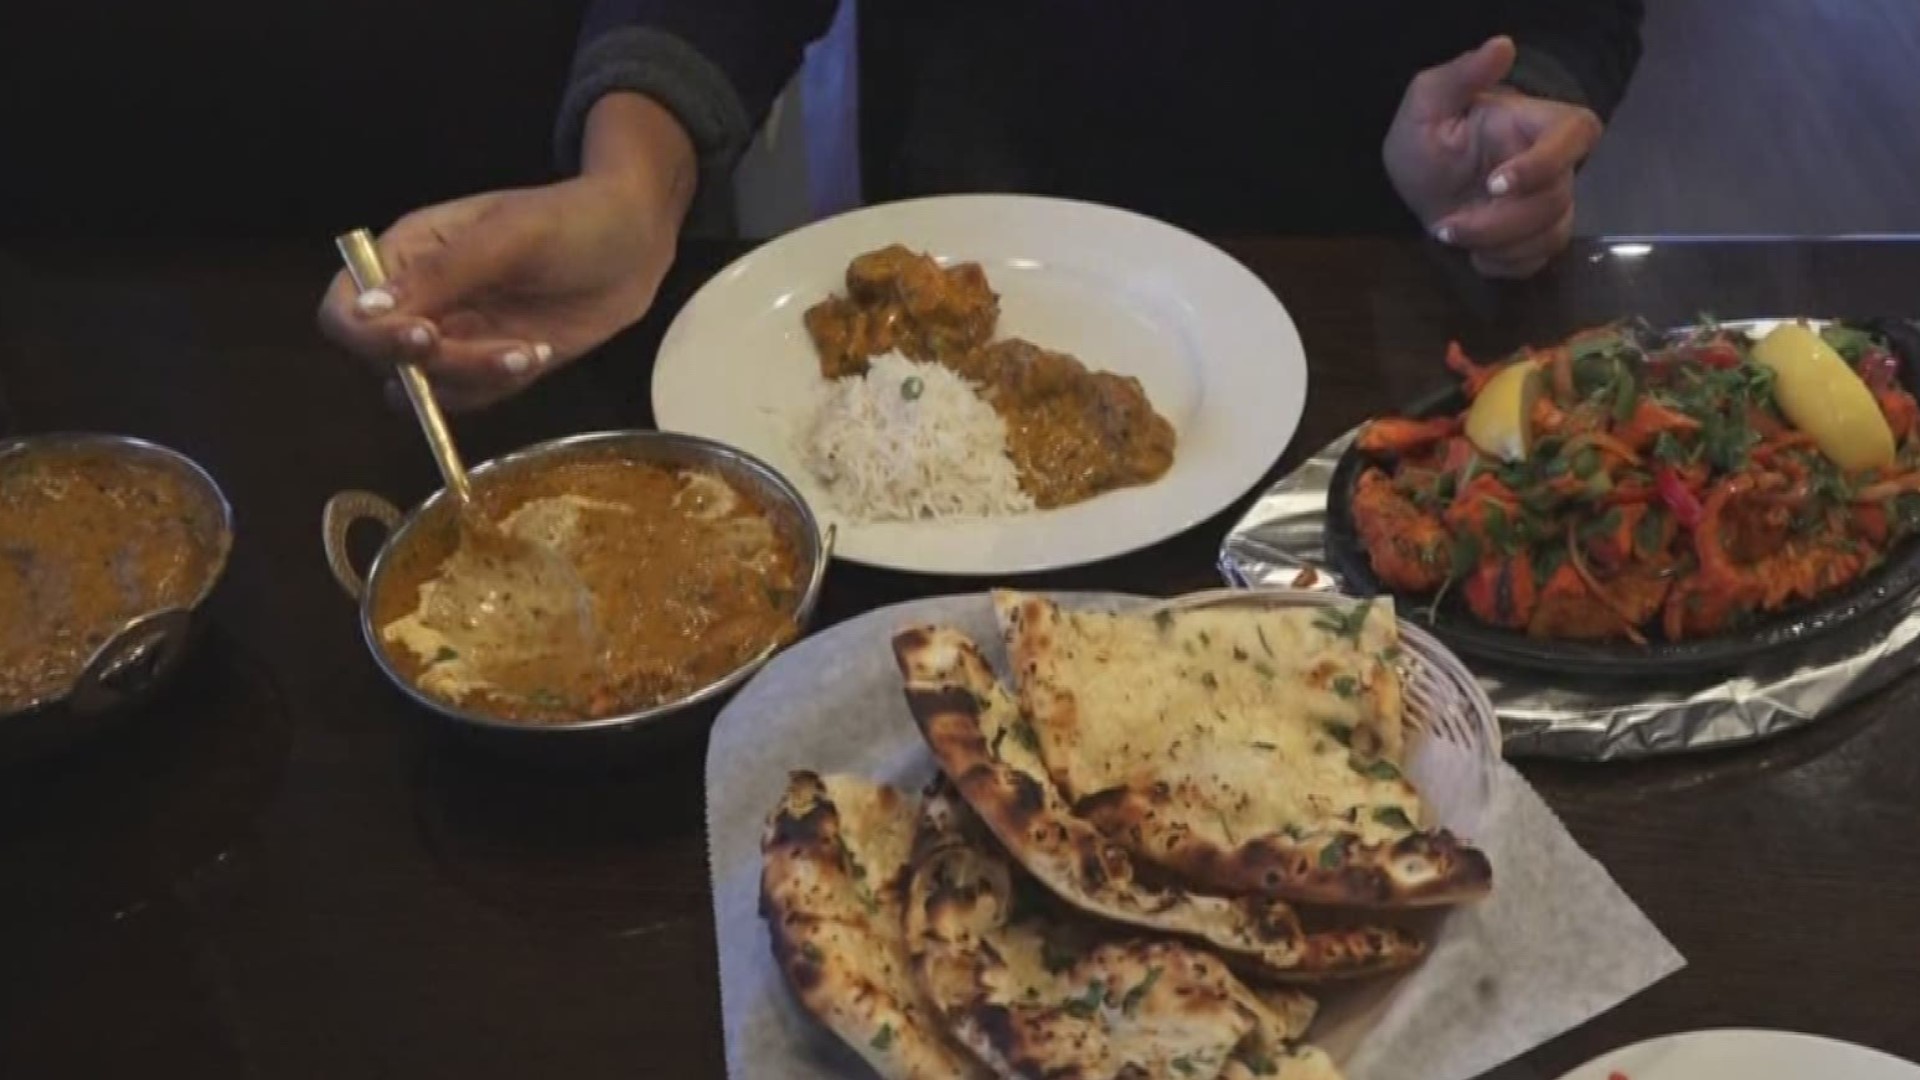 Rasoi IV Authentic Indian Cuisine specializes in North Indian food with more than 150 menu items, a rotating daily buffet, and catering.